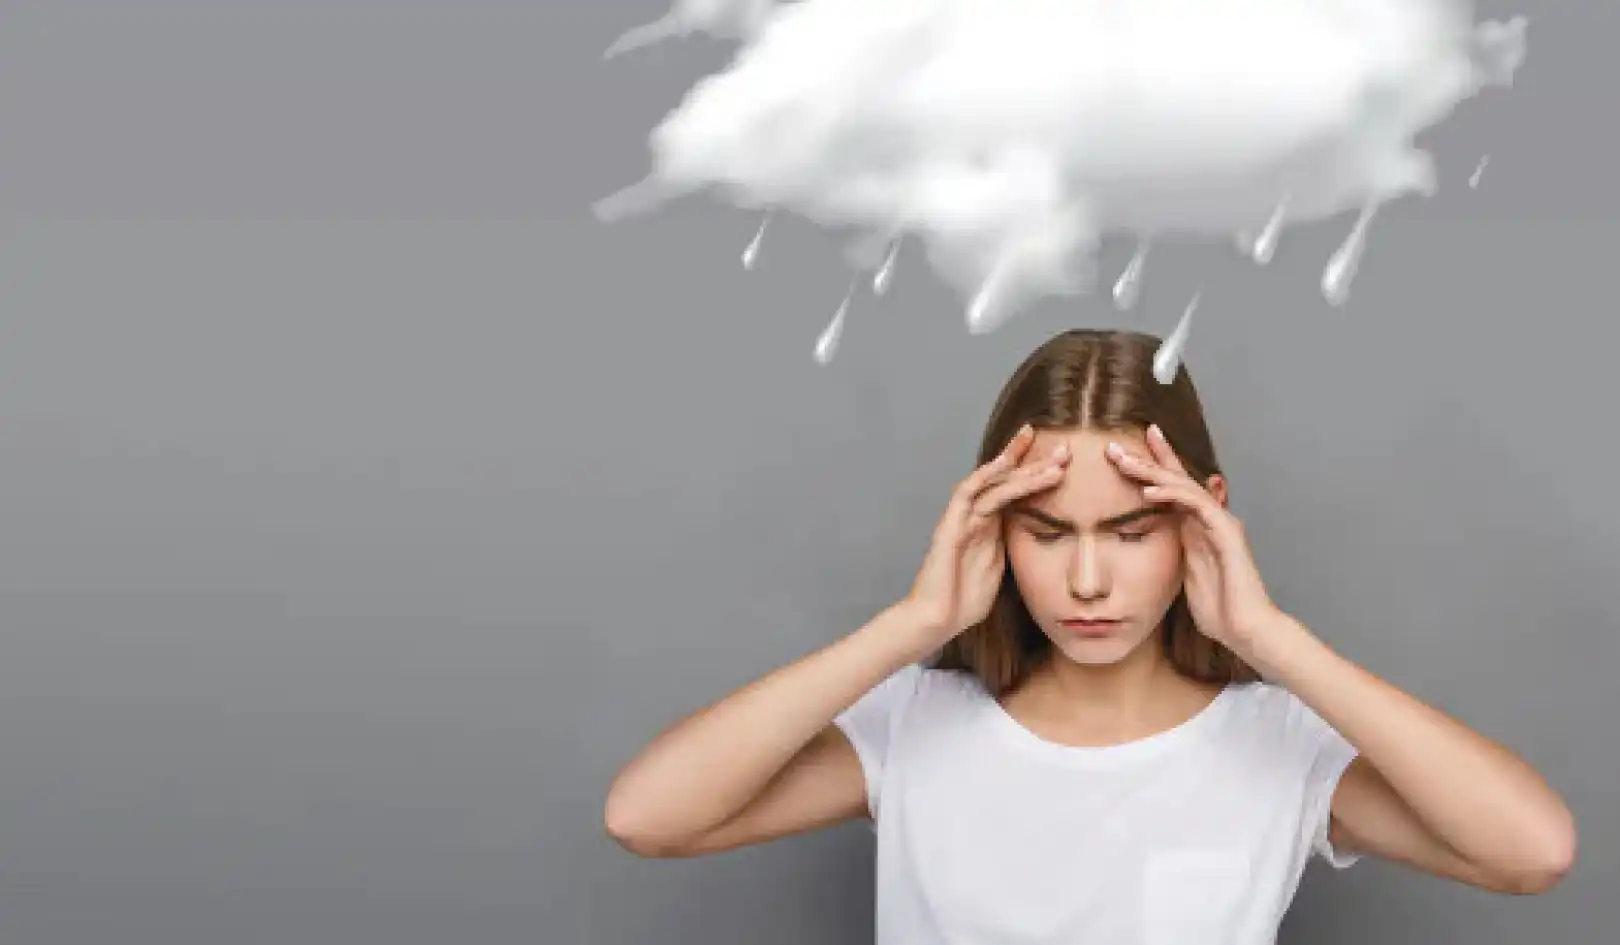 Can Bad Weather Really Cause Headaches?